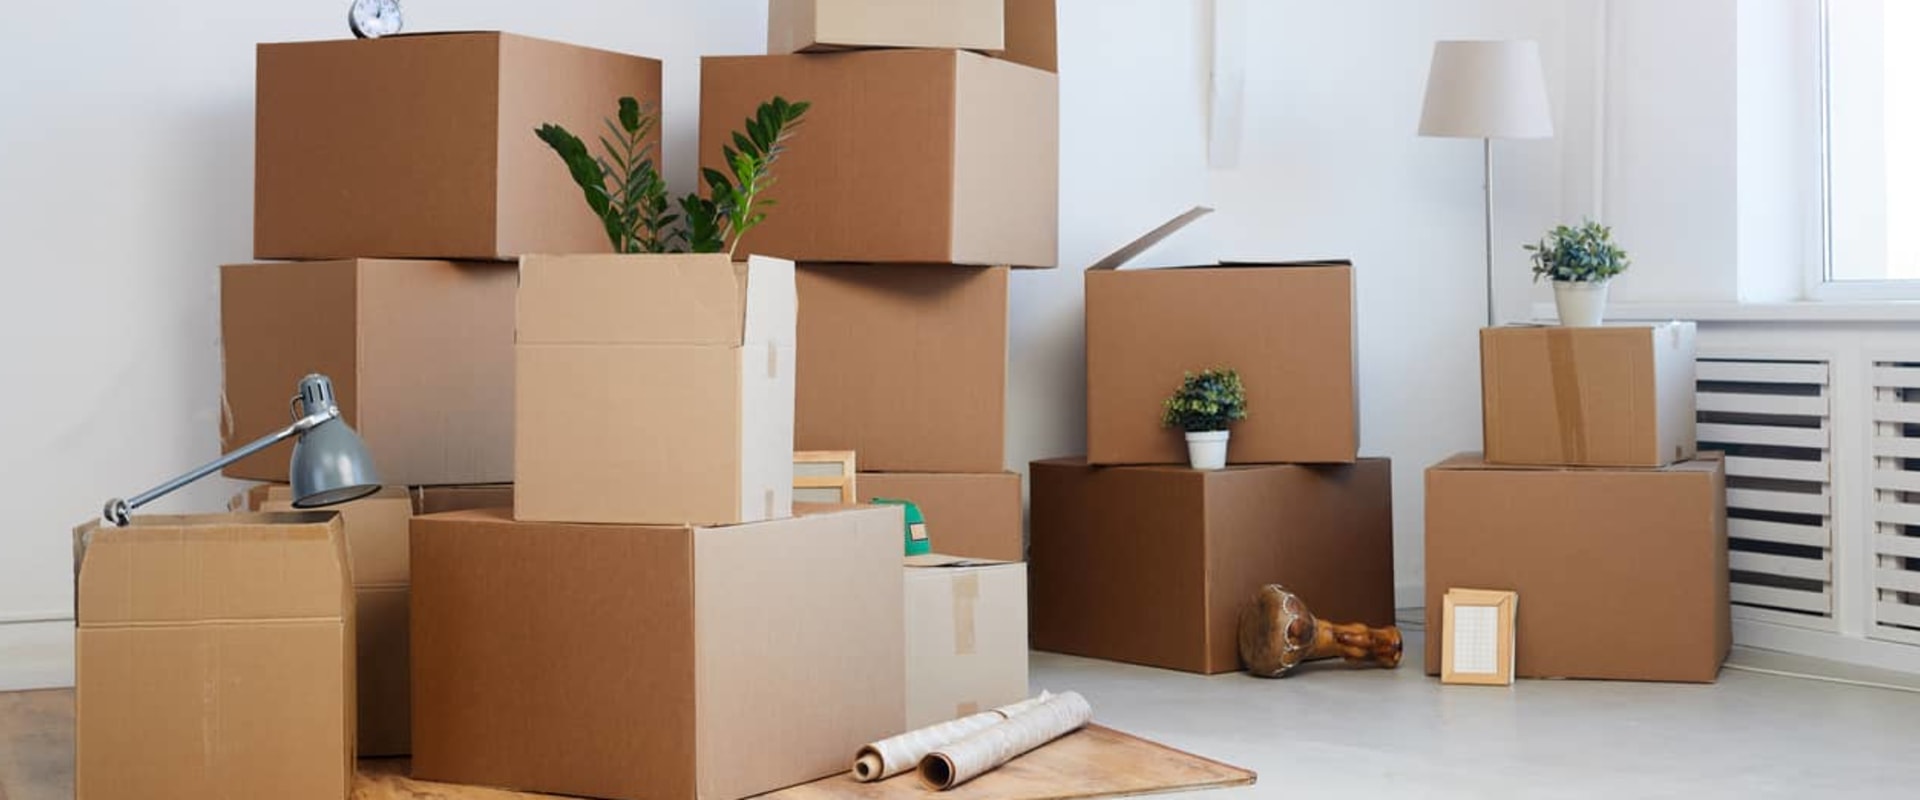 Packing Tips for a Long Distance Move